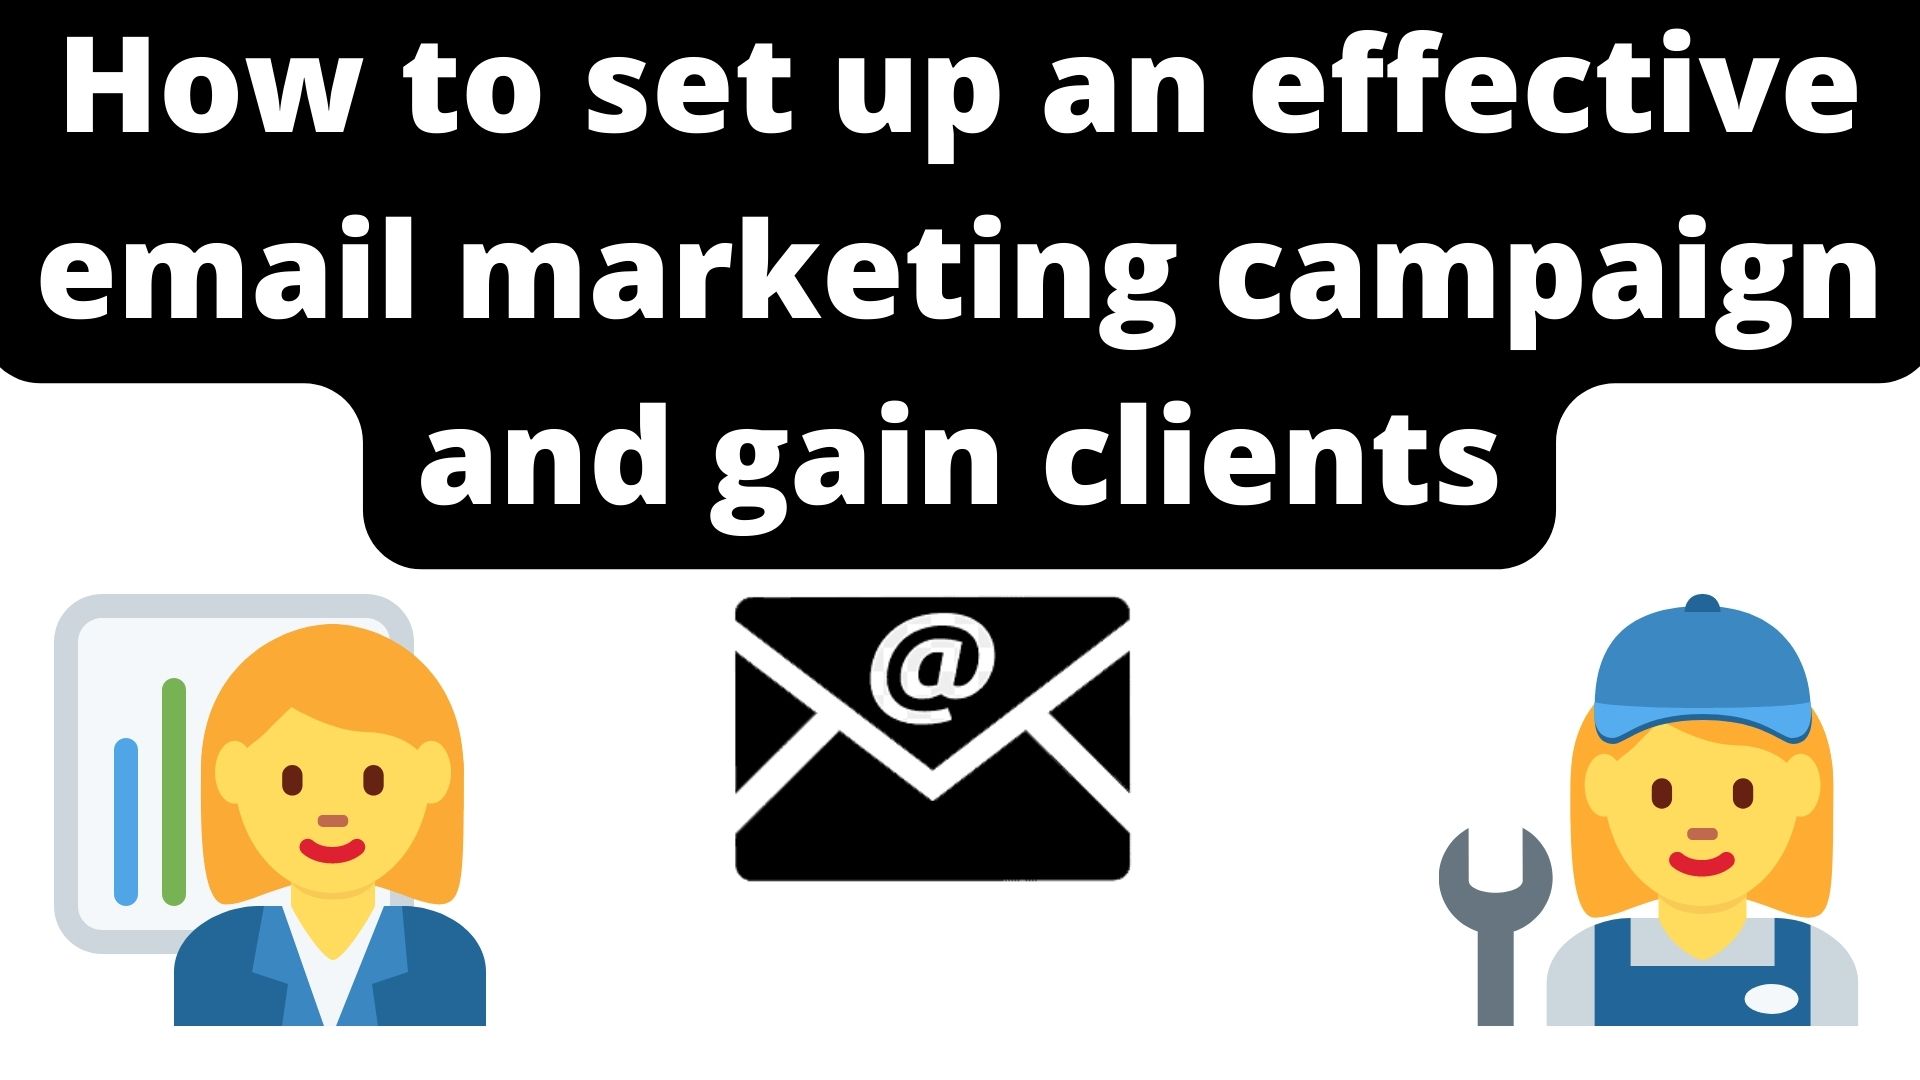 How To Set Up An Effective Email Marketing Campaign And Gain Clients